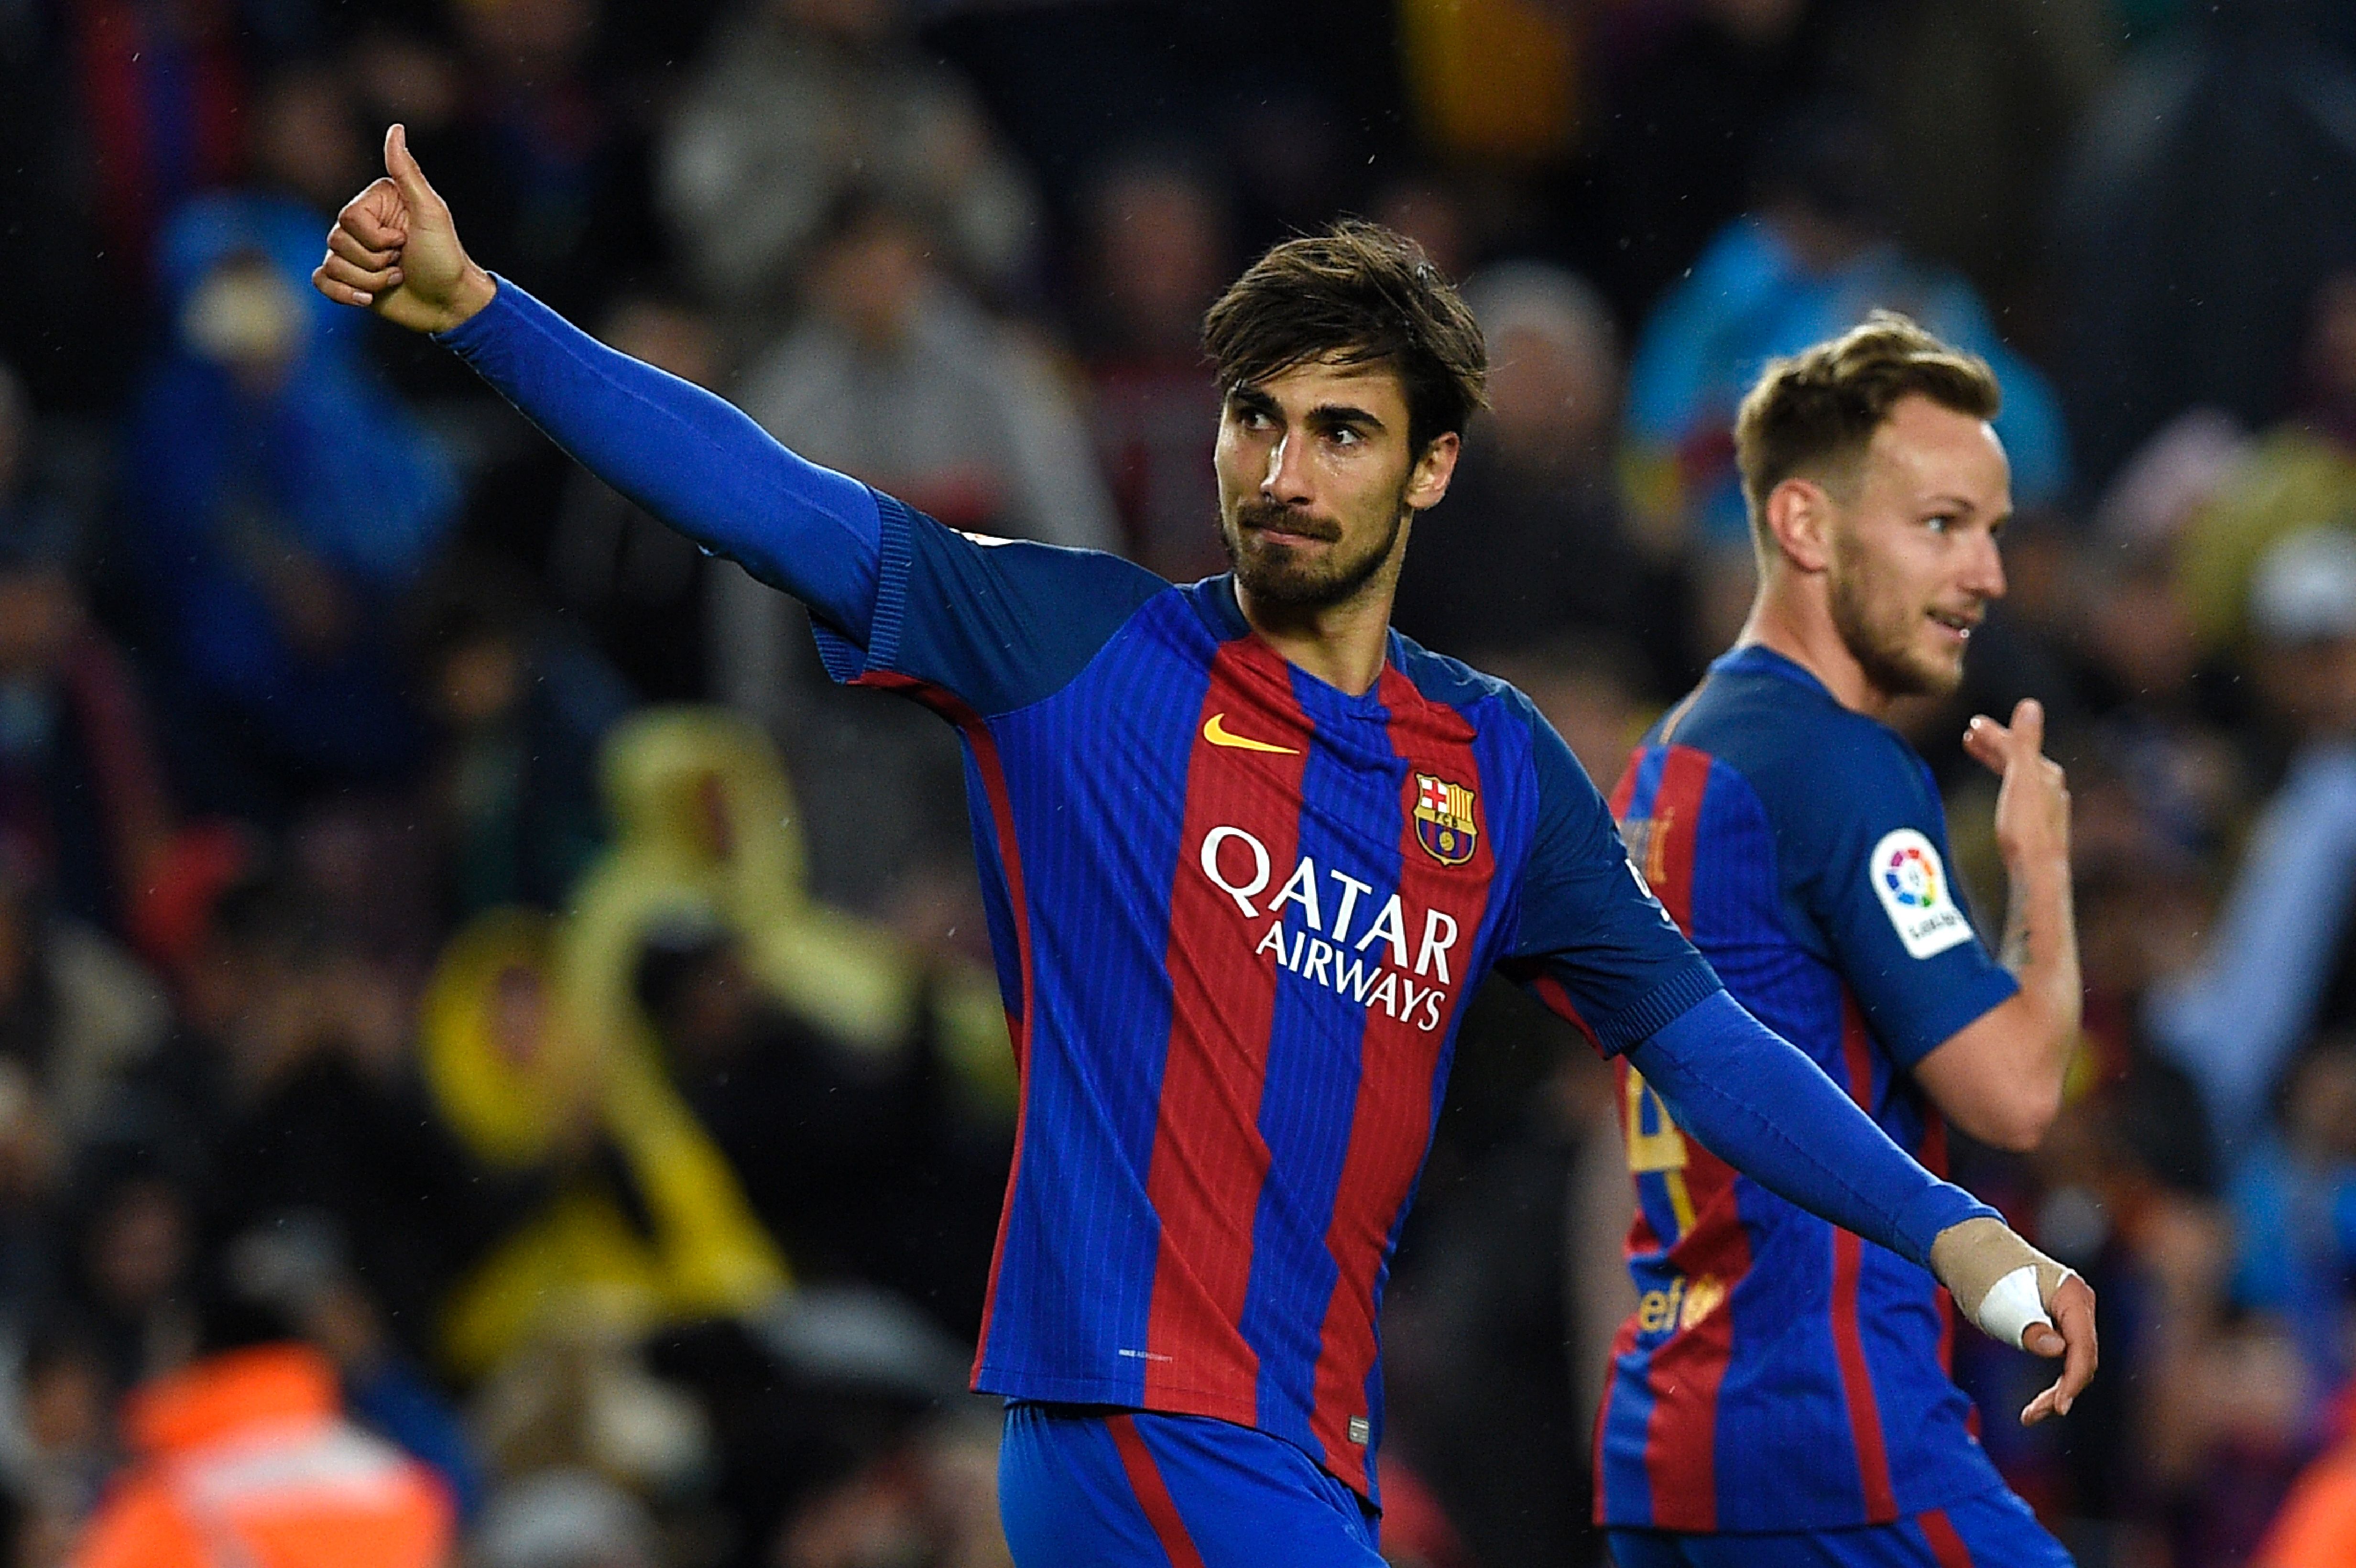 Barcelona's Portuguese midfielder Andre Gomes (L) celebrates after scoring a goal during the Spanish league football match FC Barcelona vs CA Osasuna at the Camp Nou stadium in Barcelona on April 26, 2017. / AFP PHOTO / LLUIS GENE        (Photo credit should read LLUIS GENE/AFP/Getty Images)